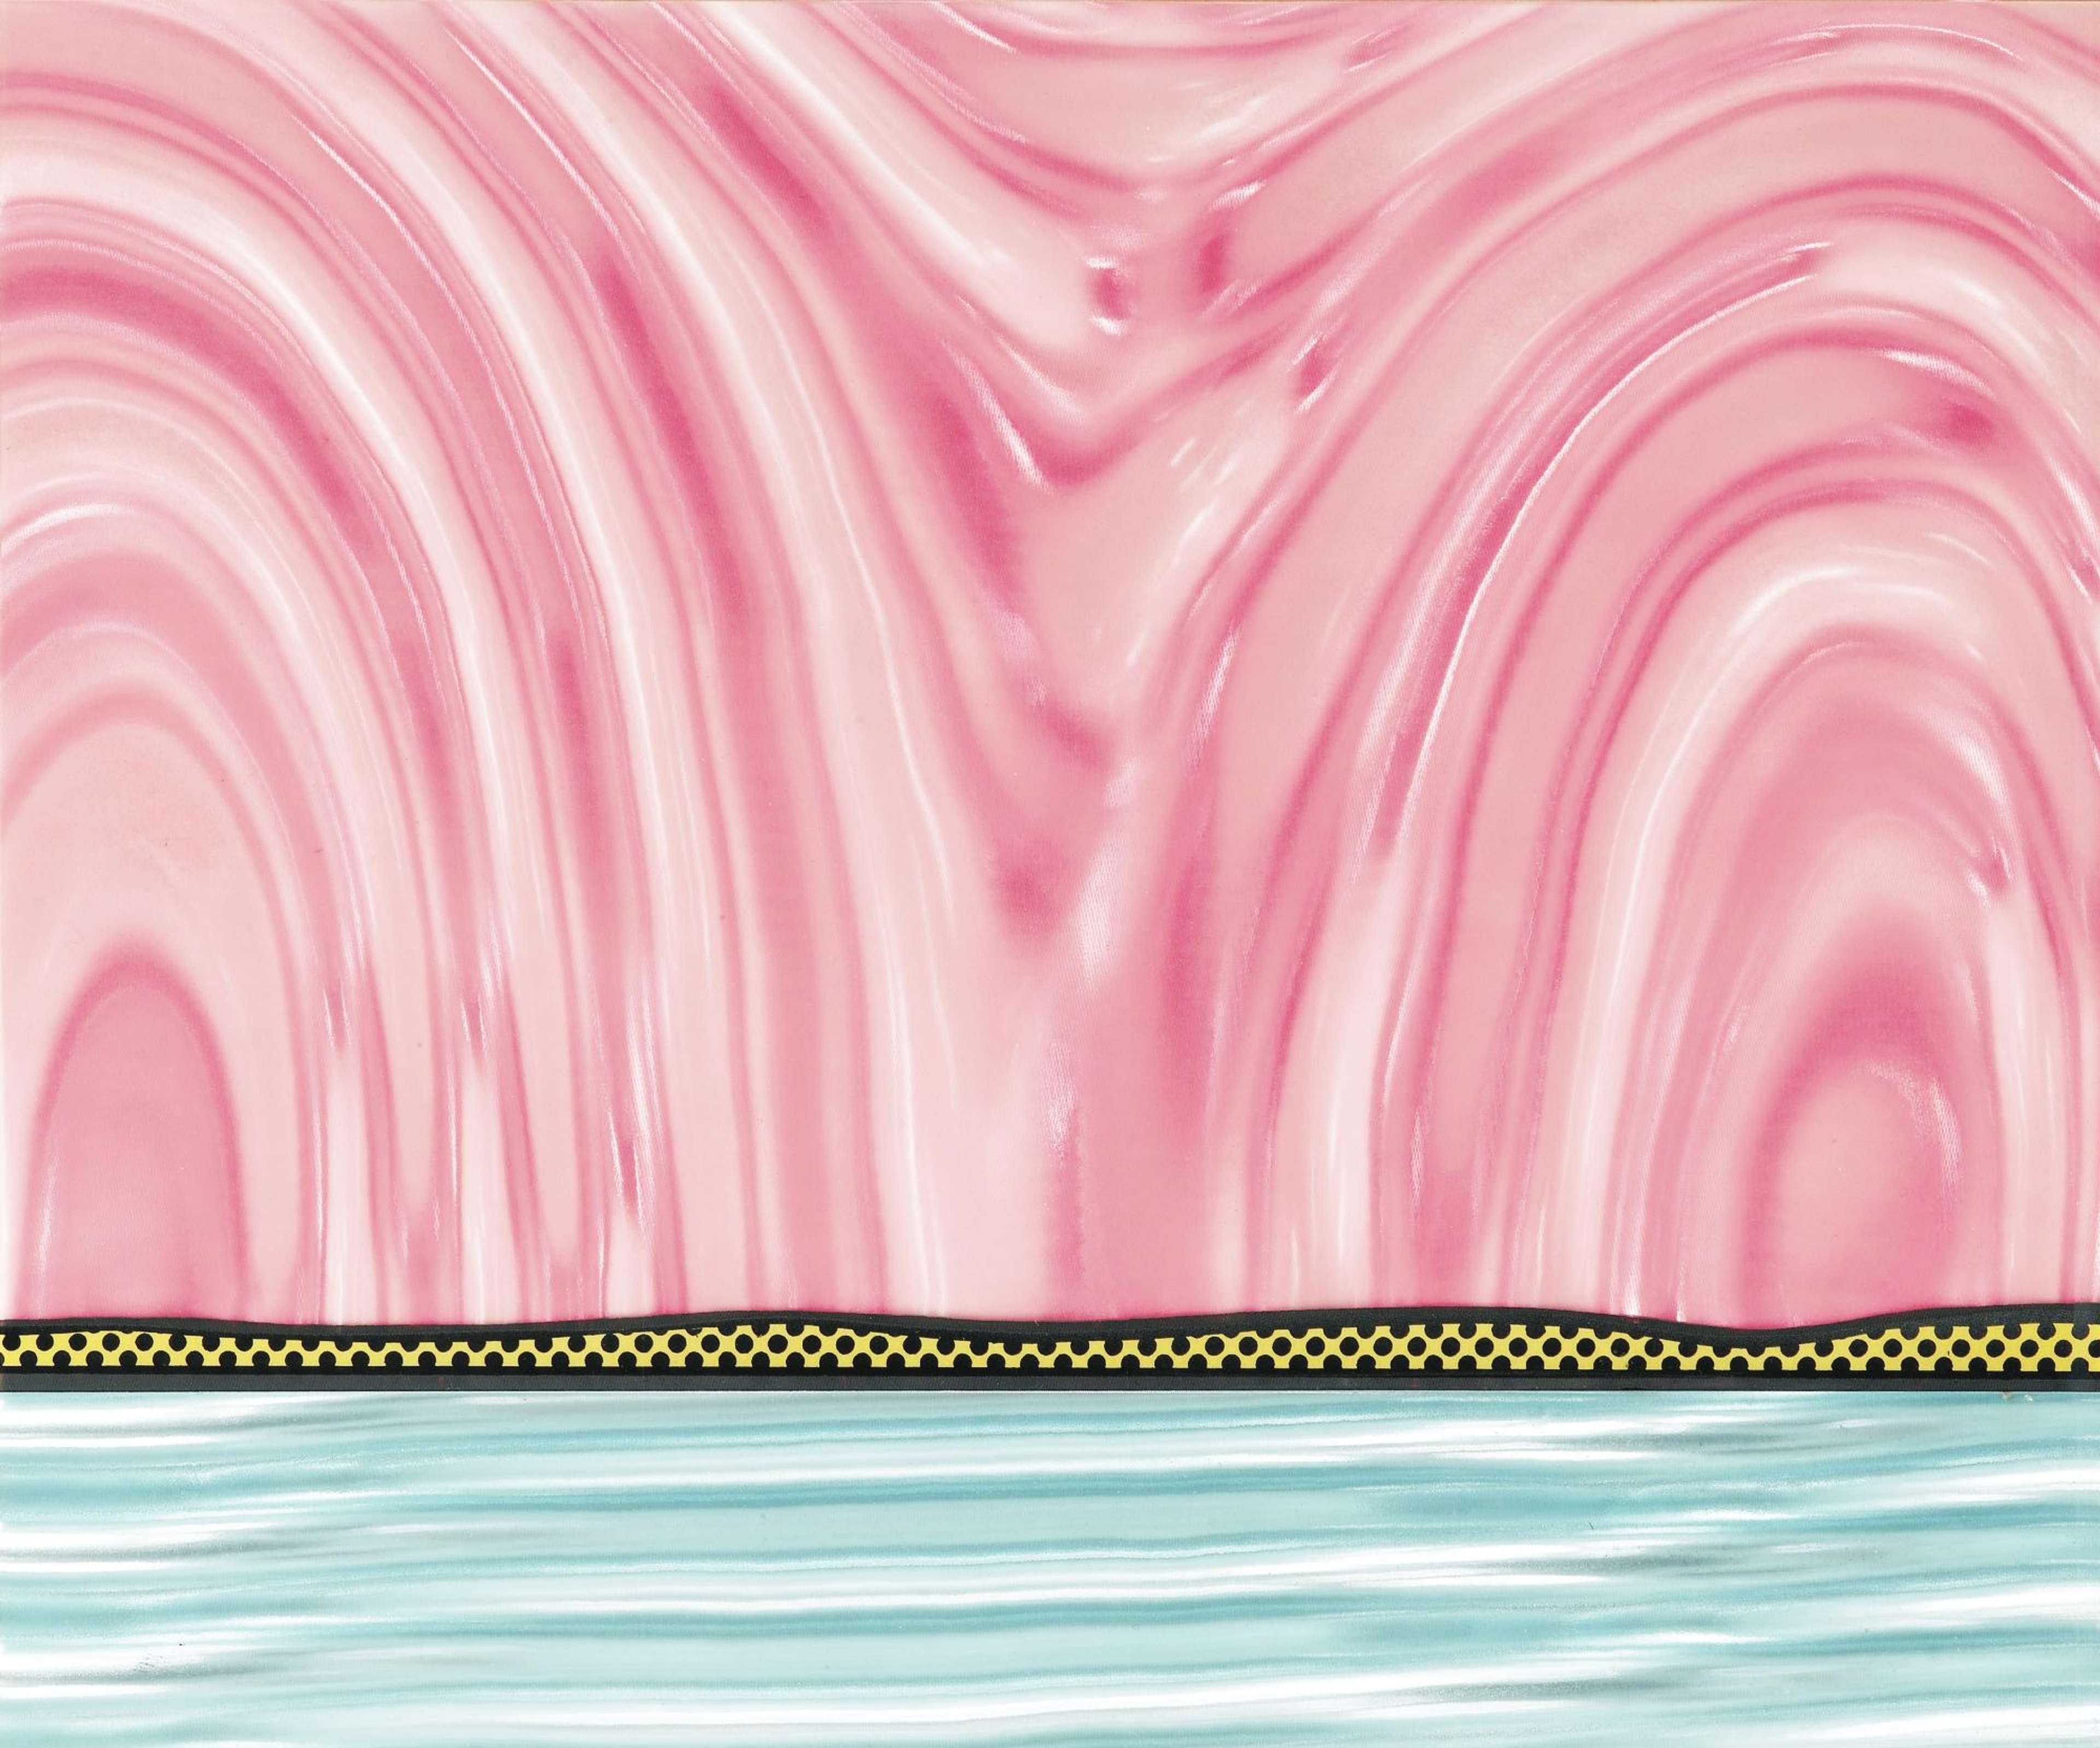 This print depicts a pink and white swirling sky set against pale turquoise coloured water. Plastic Rowlux sheets are applied in this print to mimic the shimmer of natural light. The synthetic fabric produces prismatic spatial interplays across the work’s surface, invoking a sense of movement. The reflections are interrupted in the middle by a distant mountain chain composed of black and yellow dots.